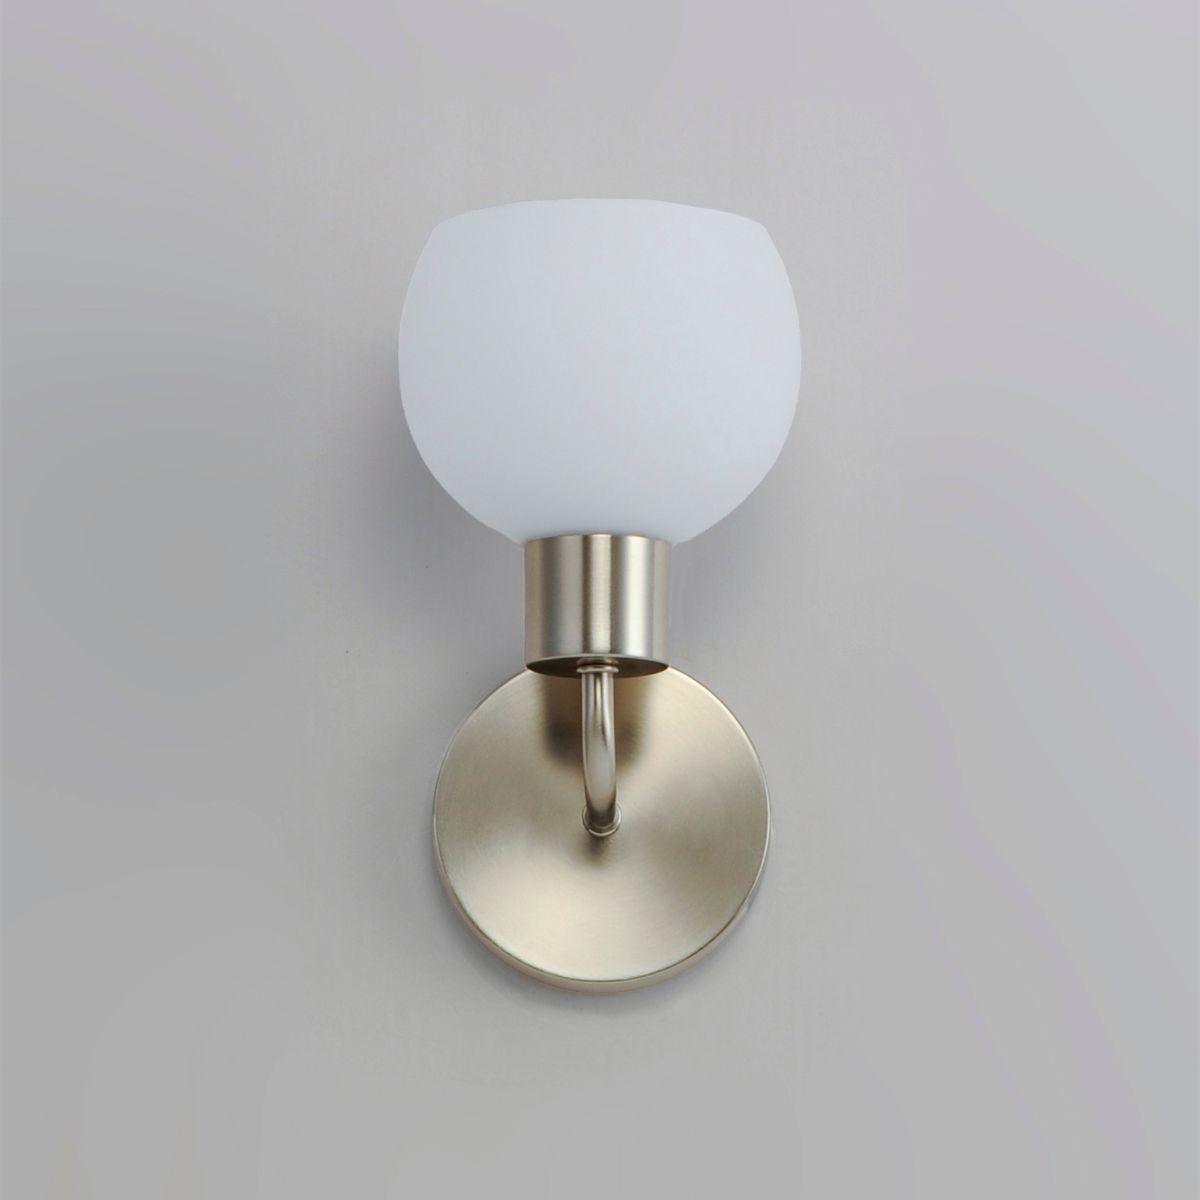 Coraline 11 in. Armed Sconce